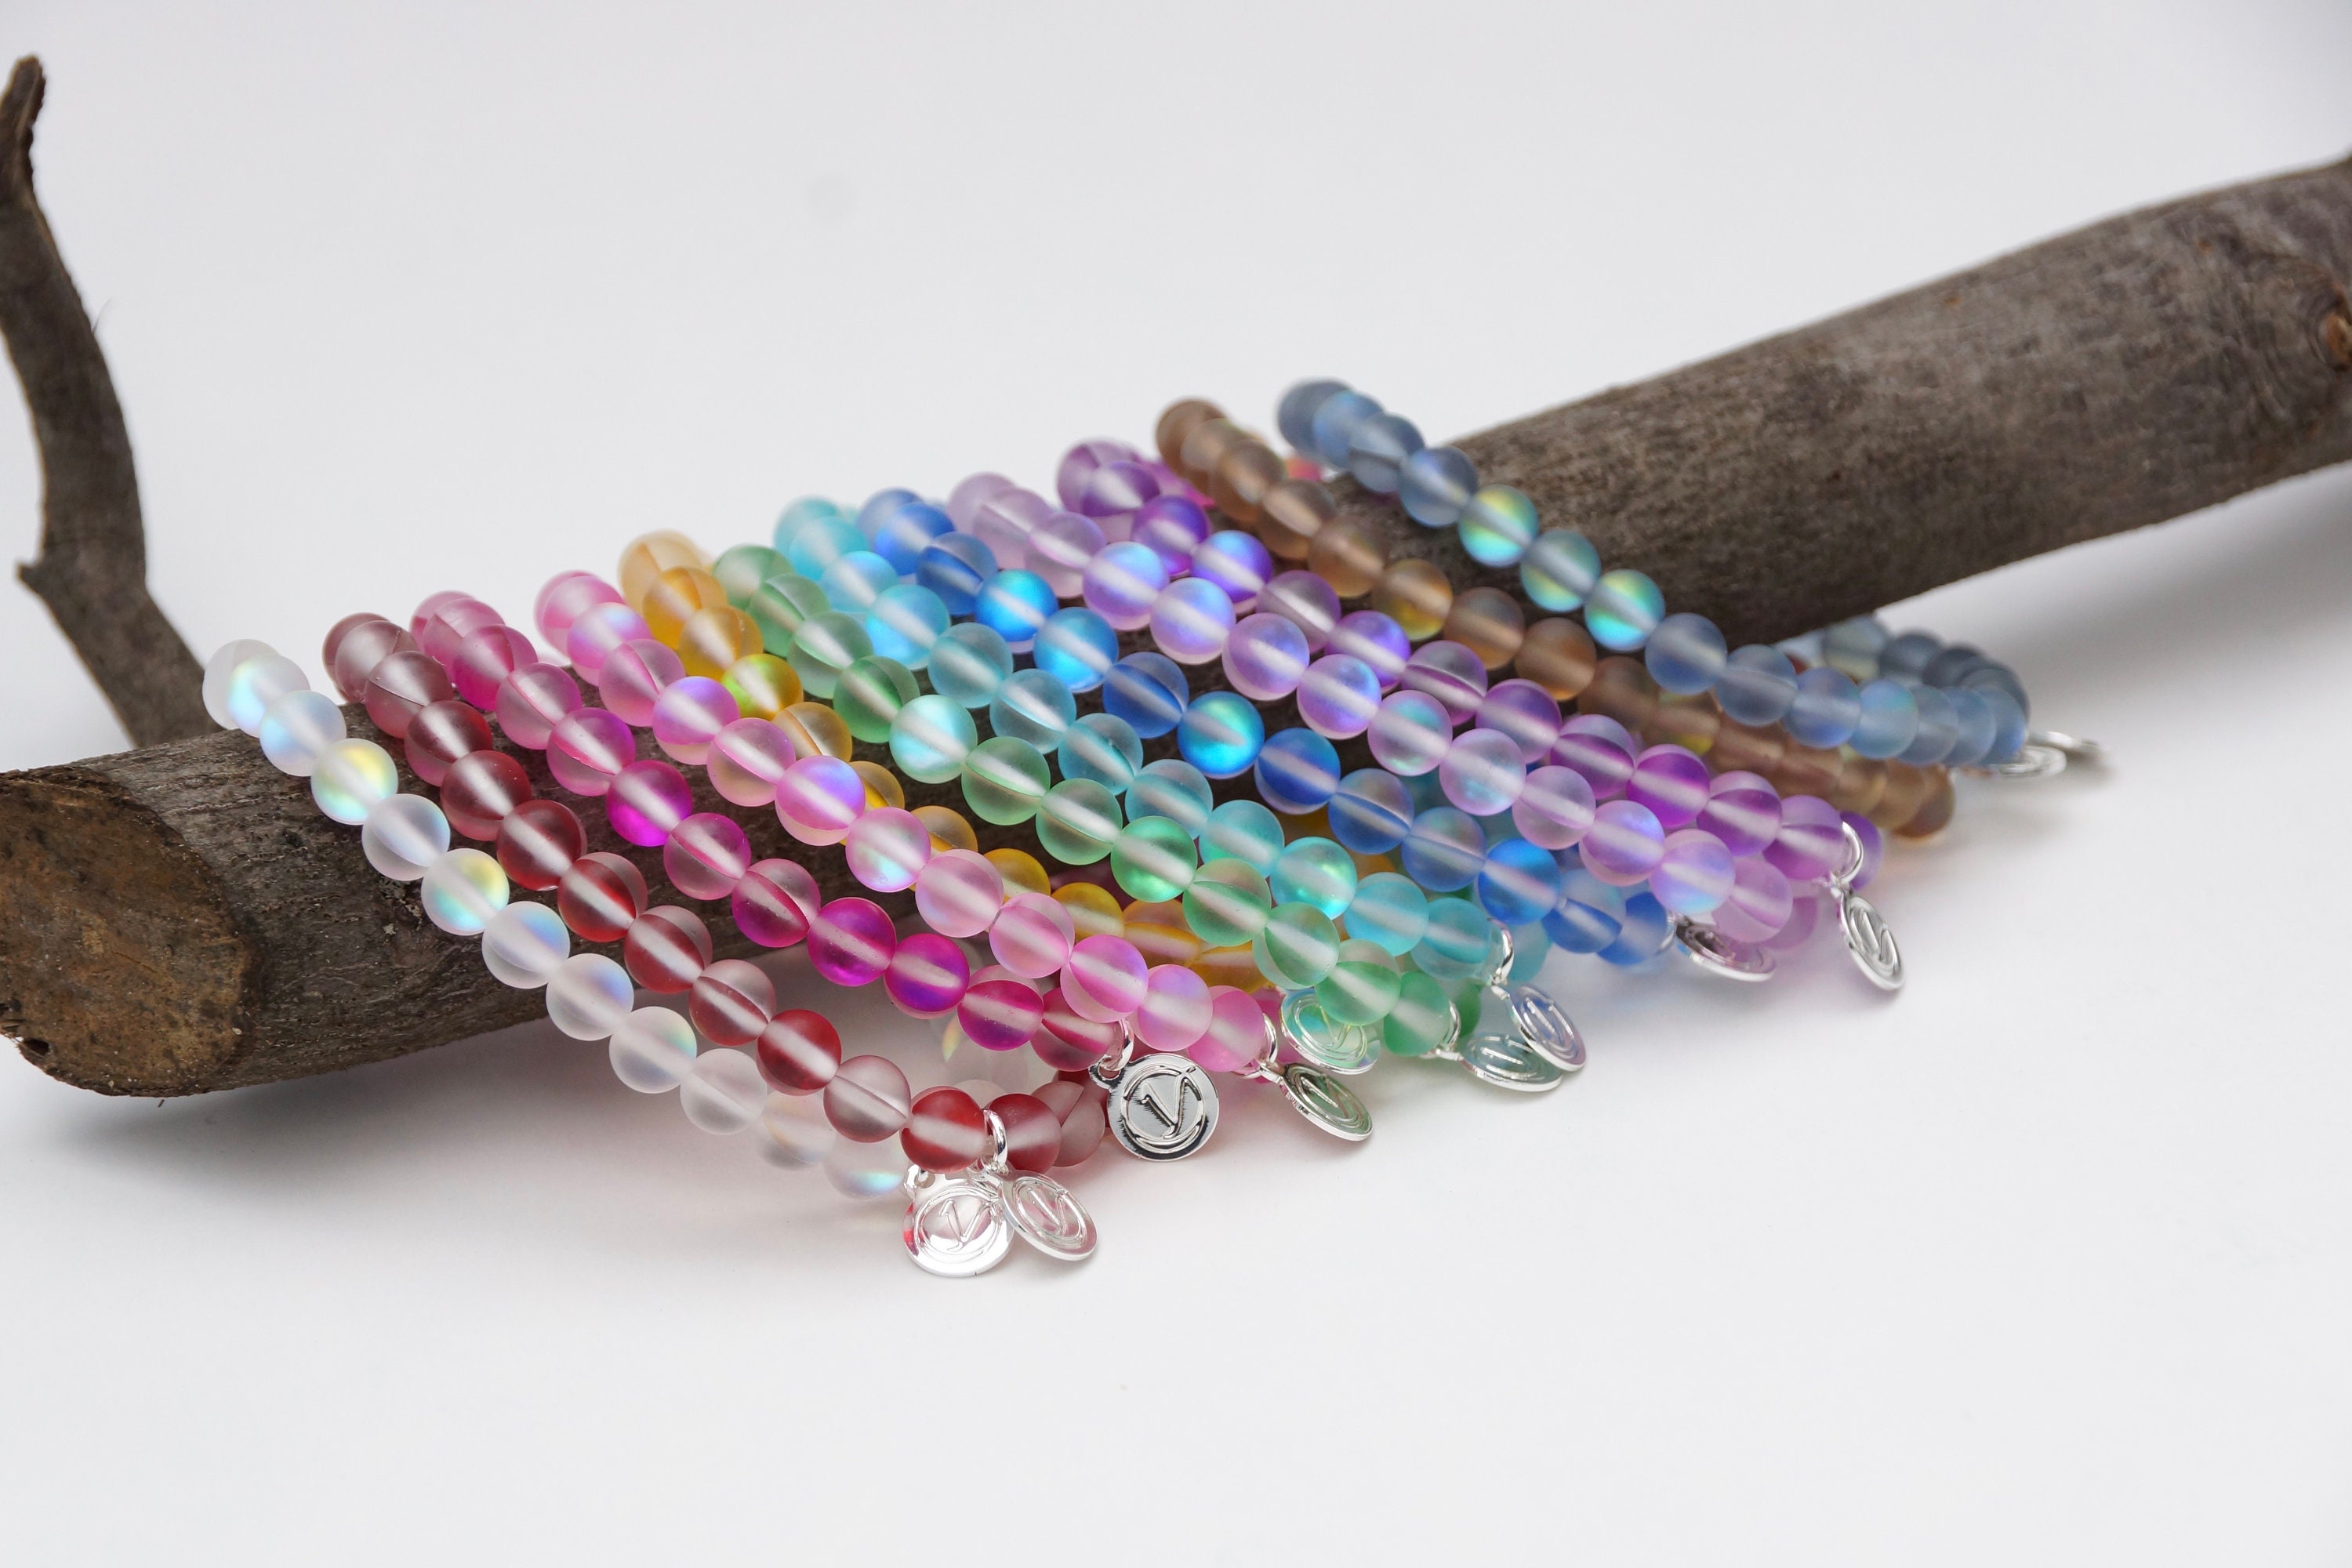 700 Pieces Glass Beads for Jewelry Making, 28 Colors 8mm Crystal Bracelet  and DIY Craft Beads Kit